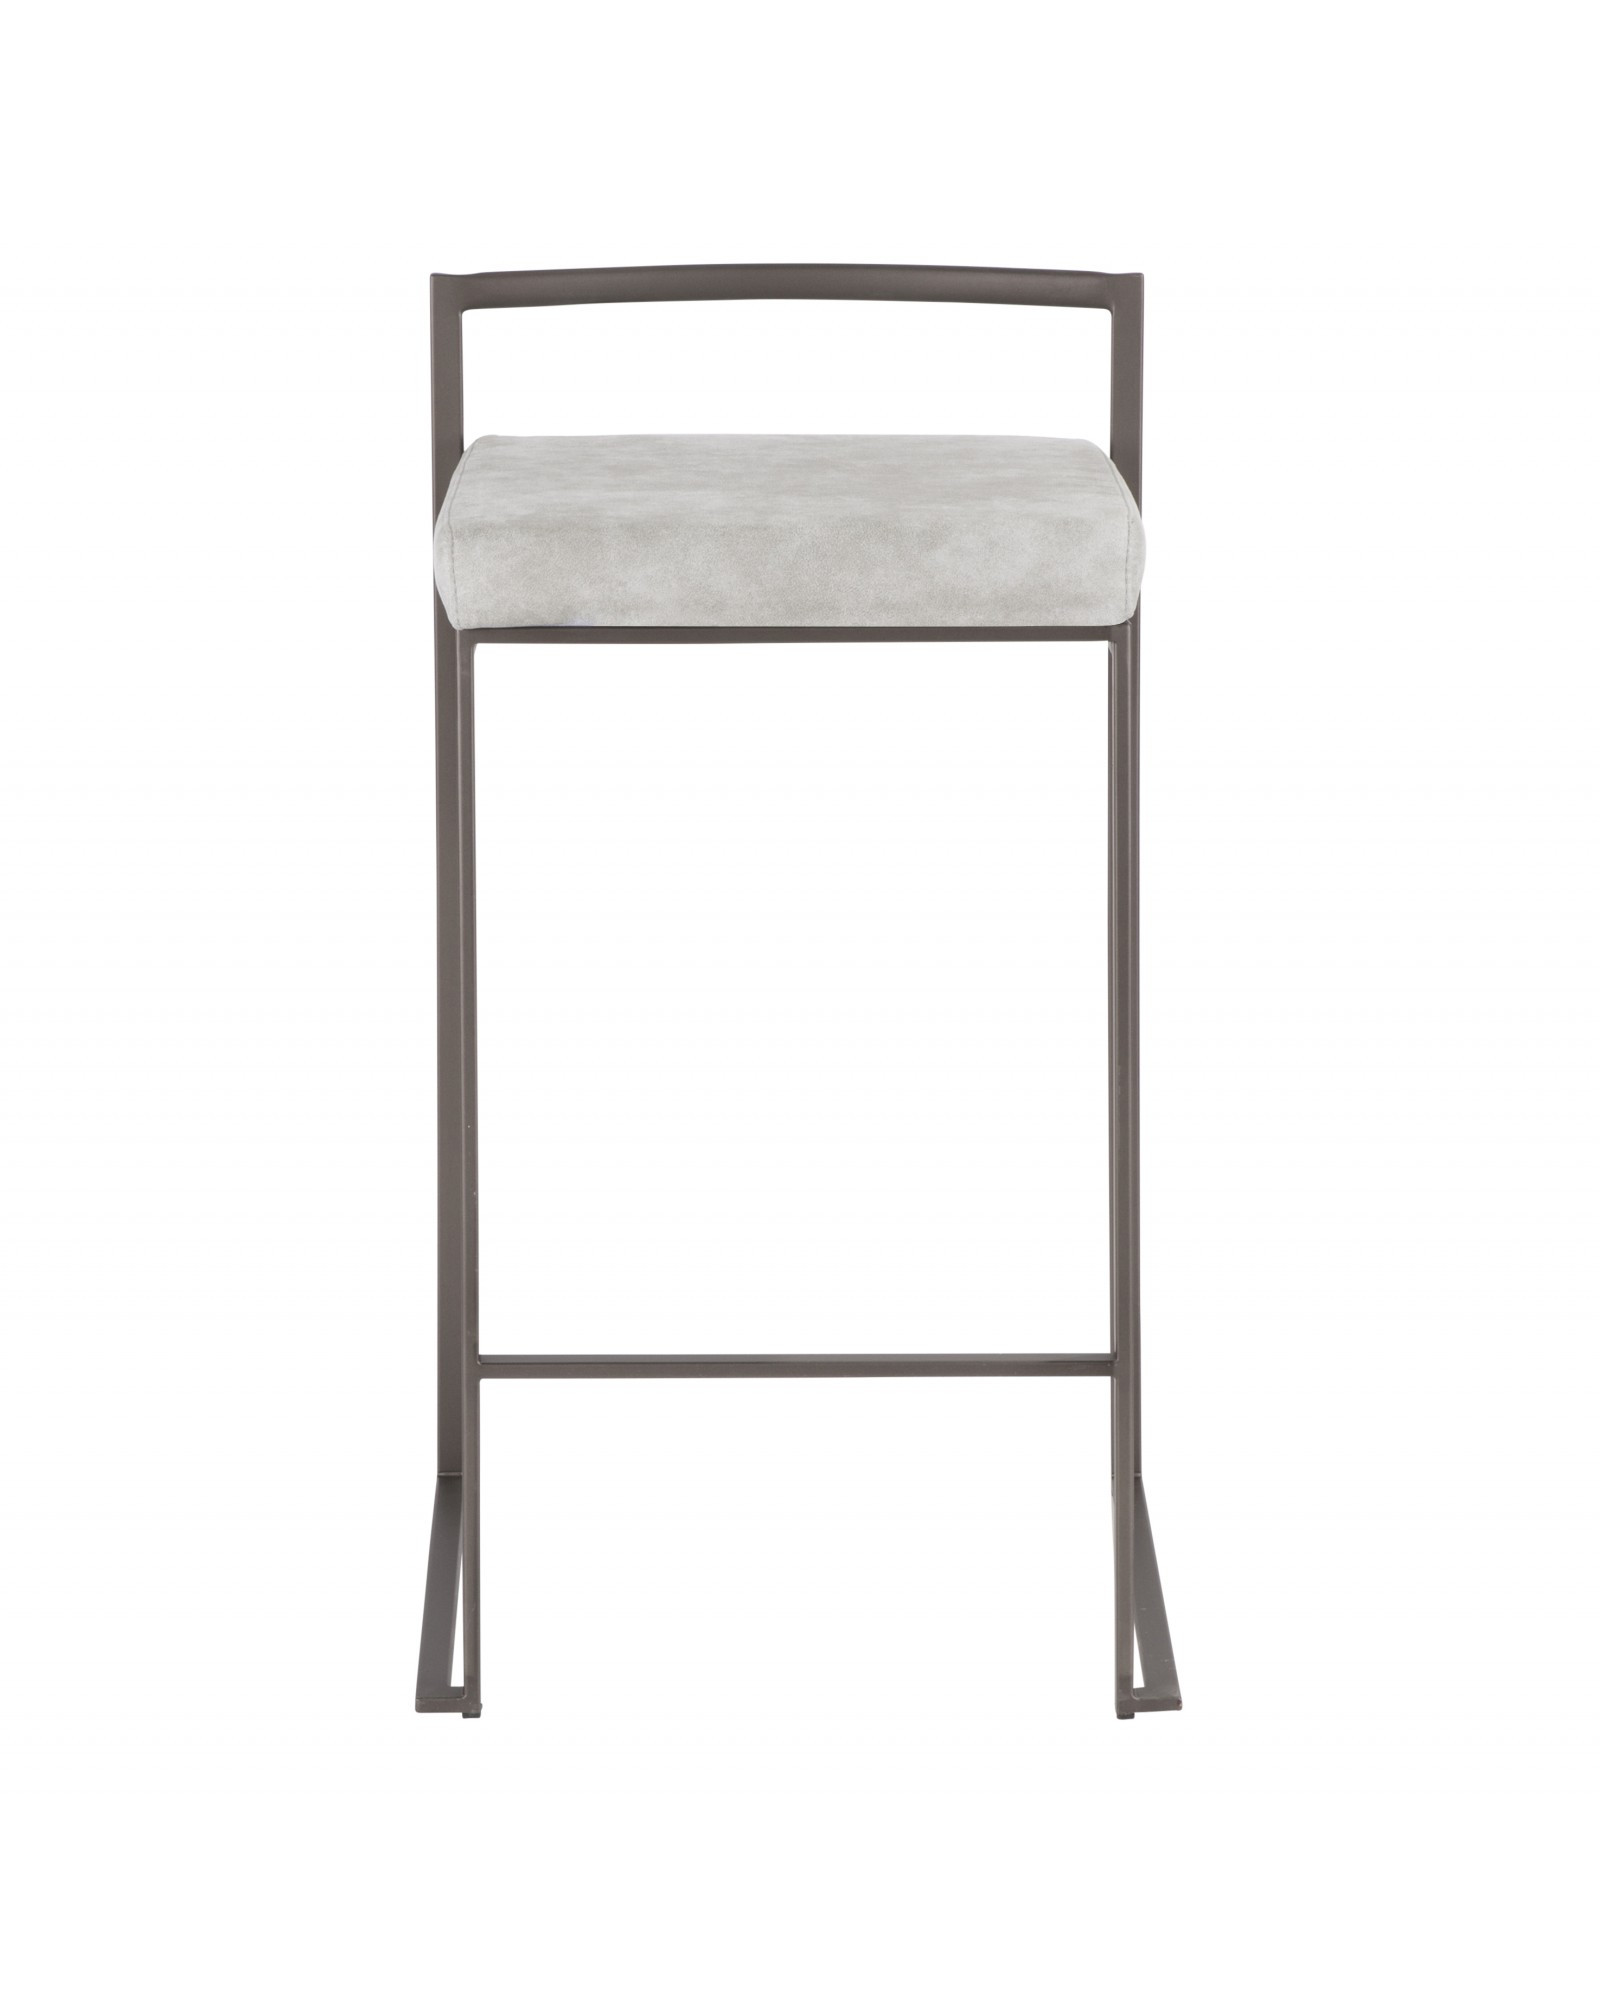 Fuji Industrial Stackable Counter Stool in Antique with Light Grey Cowboy Fabric Cushion - Set of 2